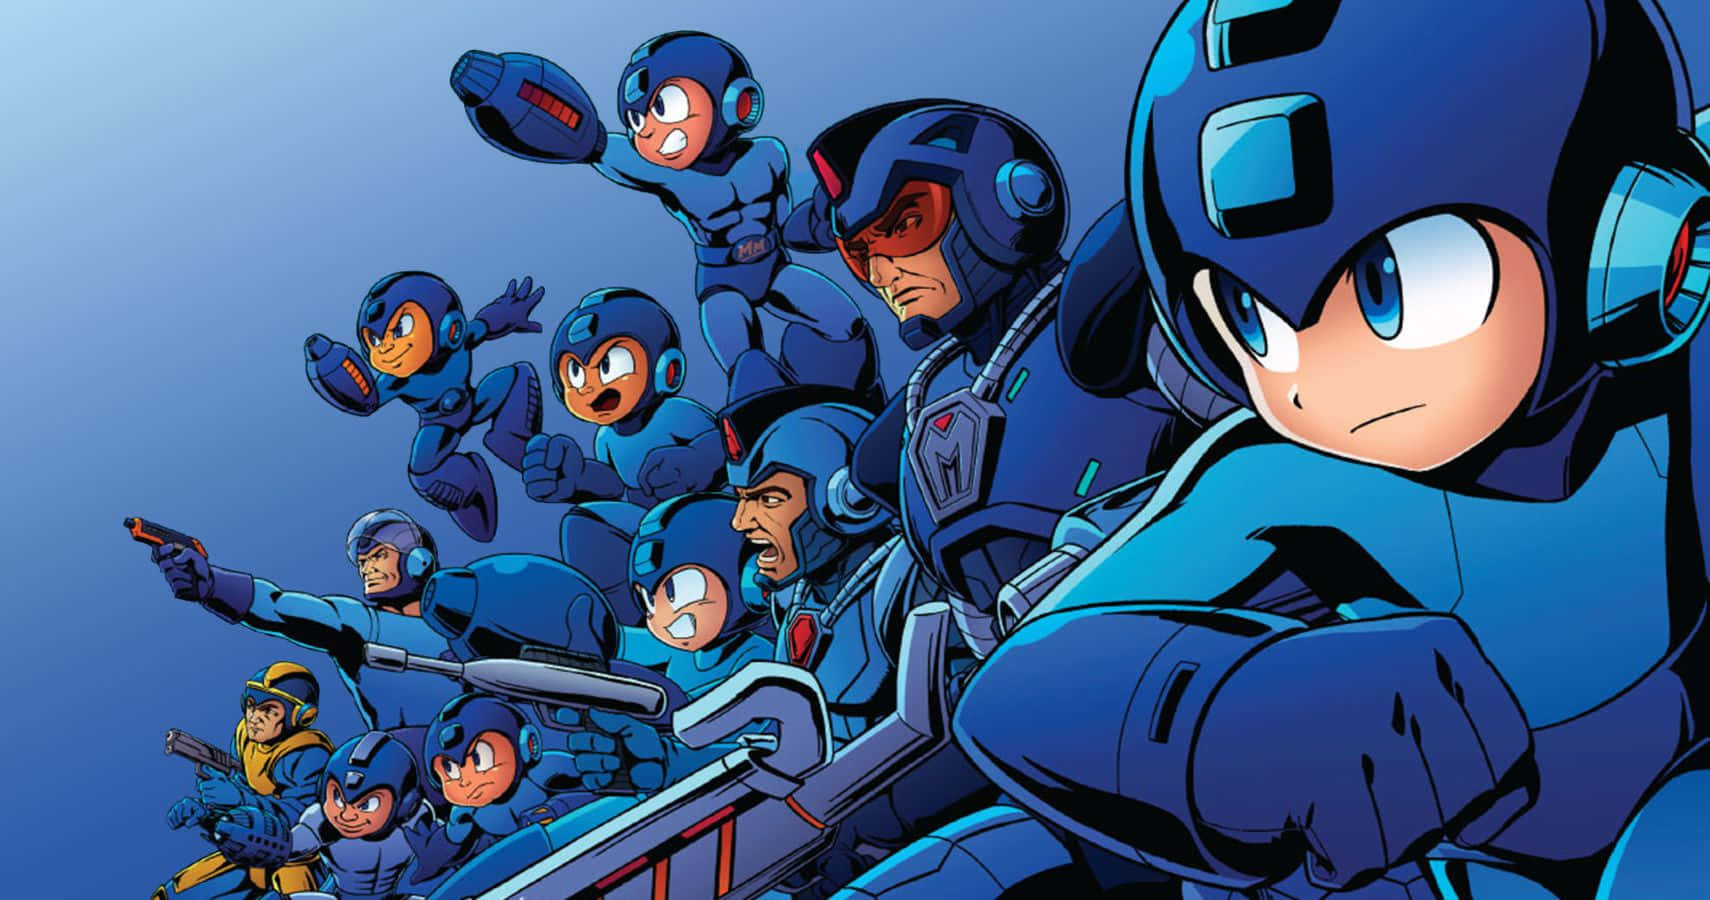 Iconic Megaman in Action